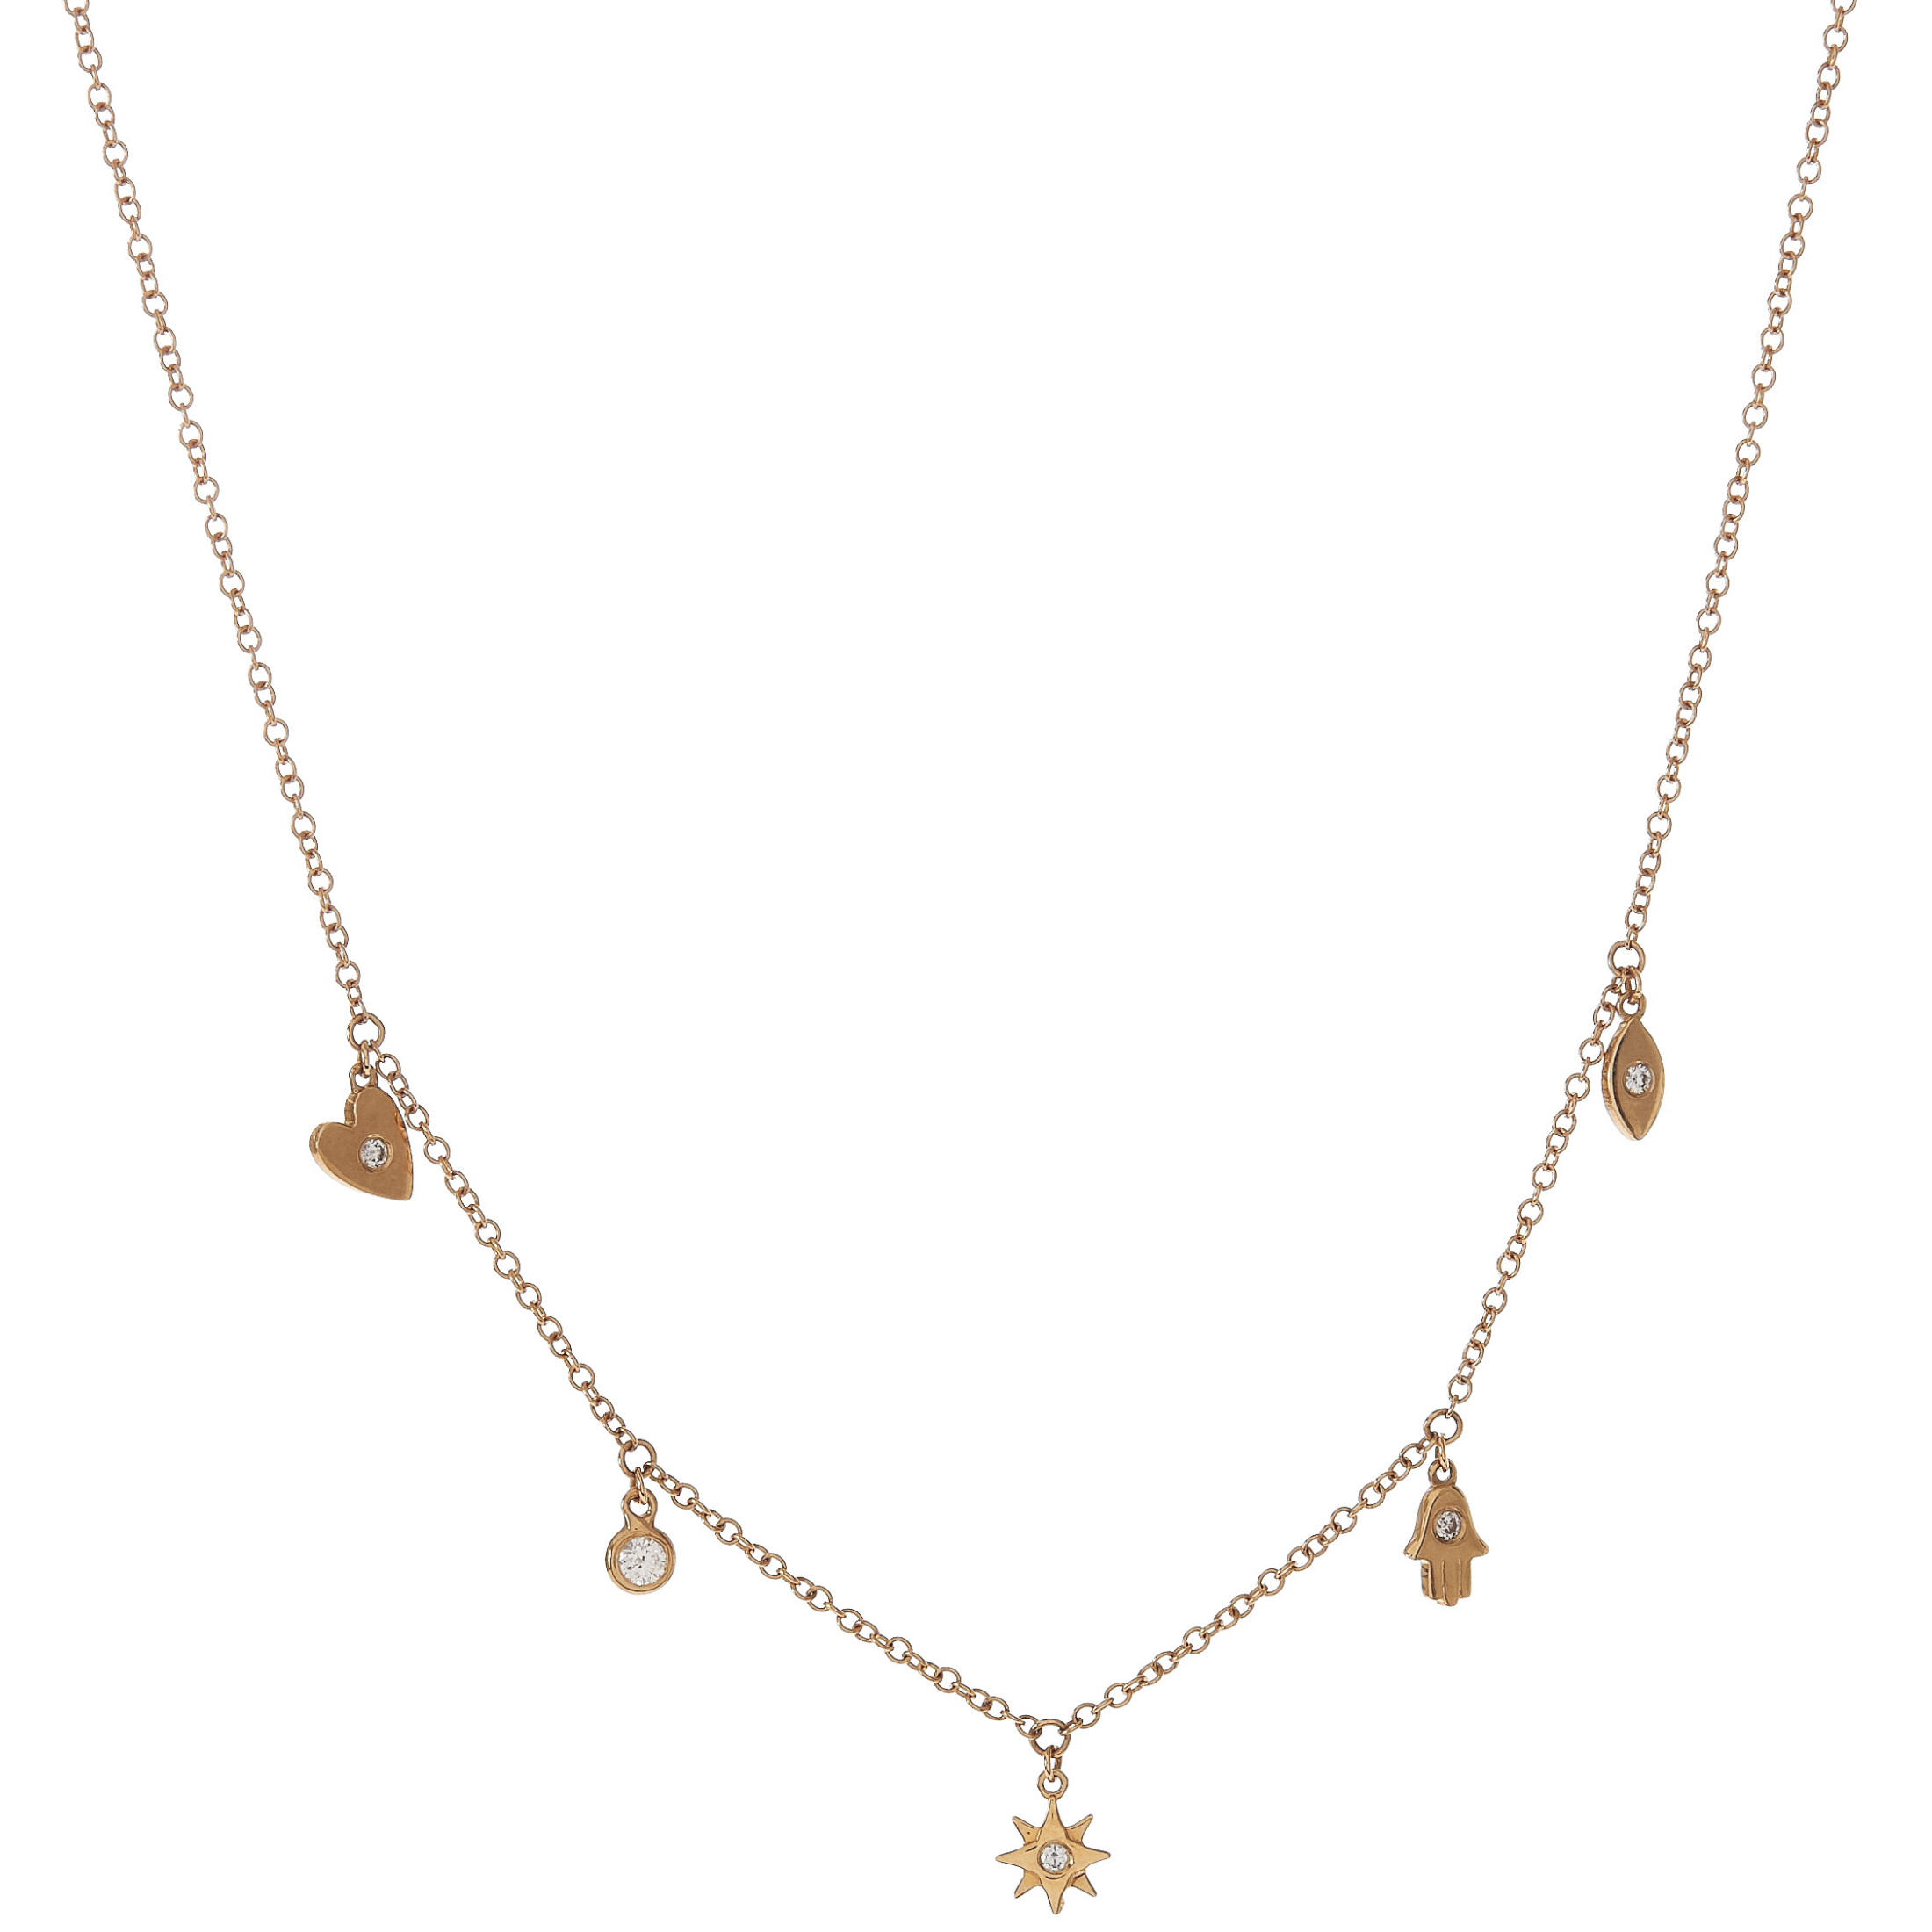 Personalized Charm Necklace in Recycled 14K Gold | Catbird